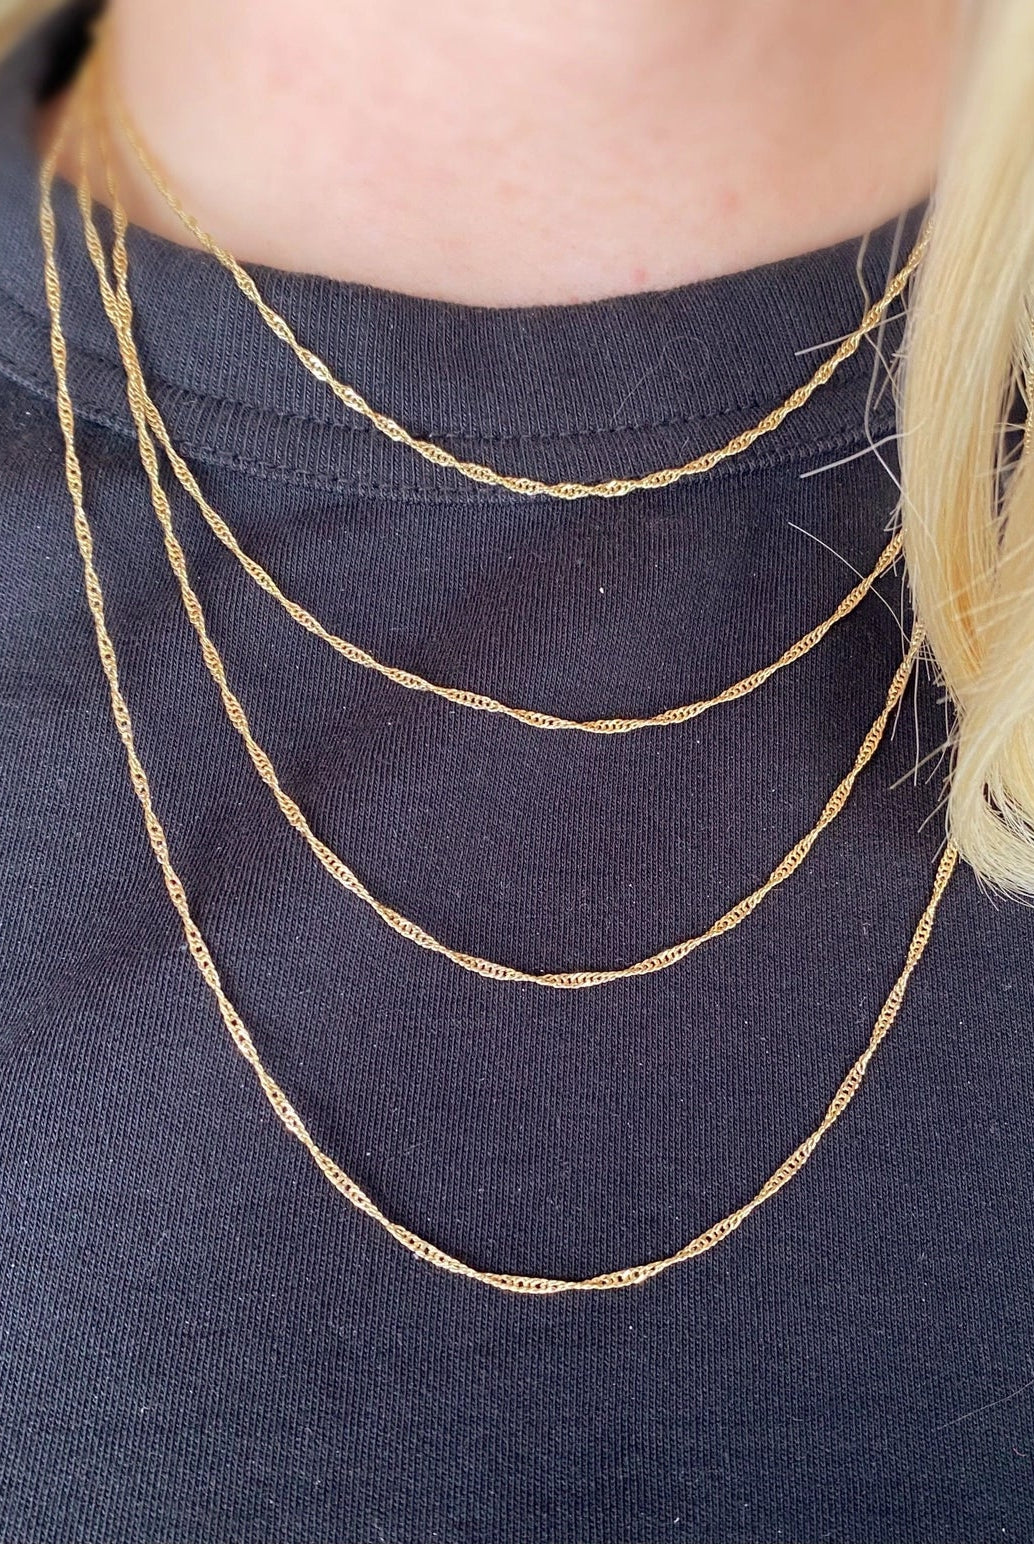 18k Gold Filled Singapore Chain Apex Ethical Boutique